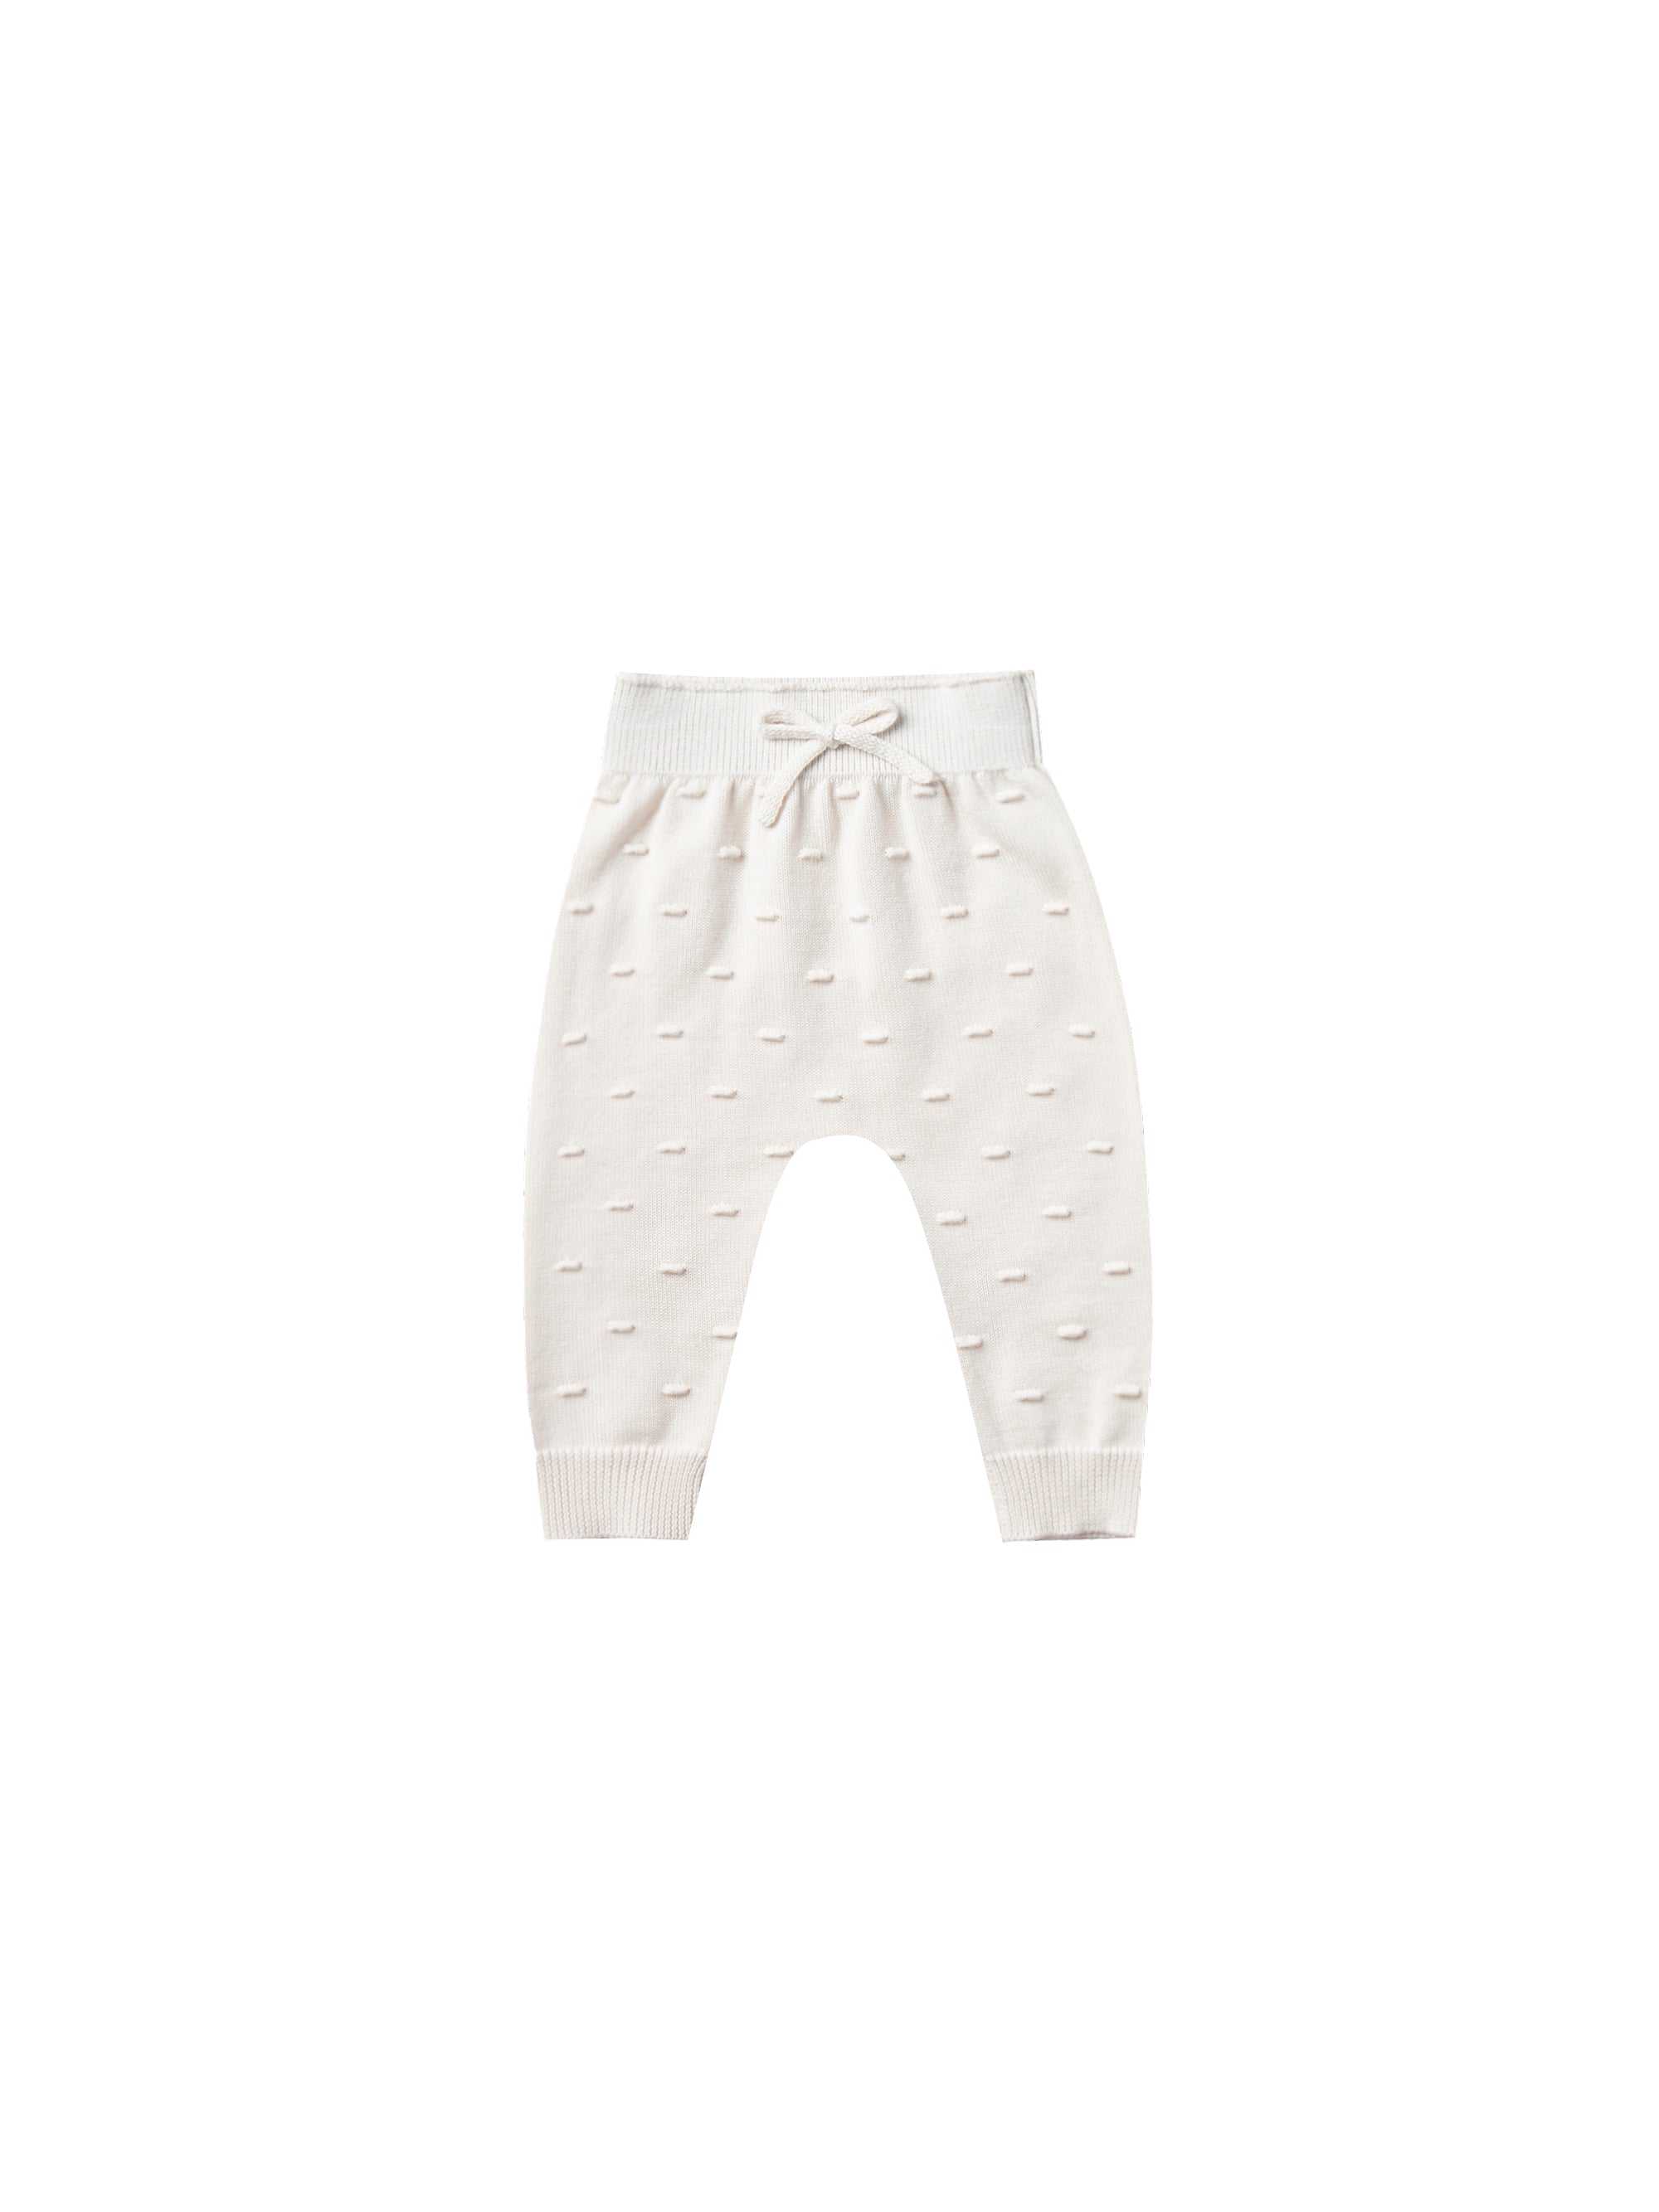 QUINCY MAE KNIT PANT / IVORY